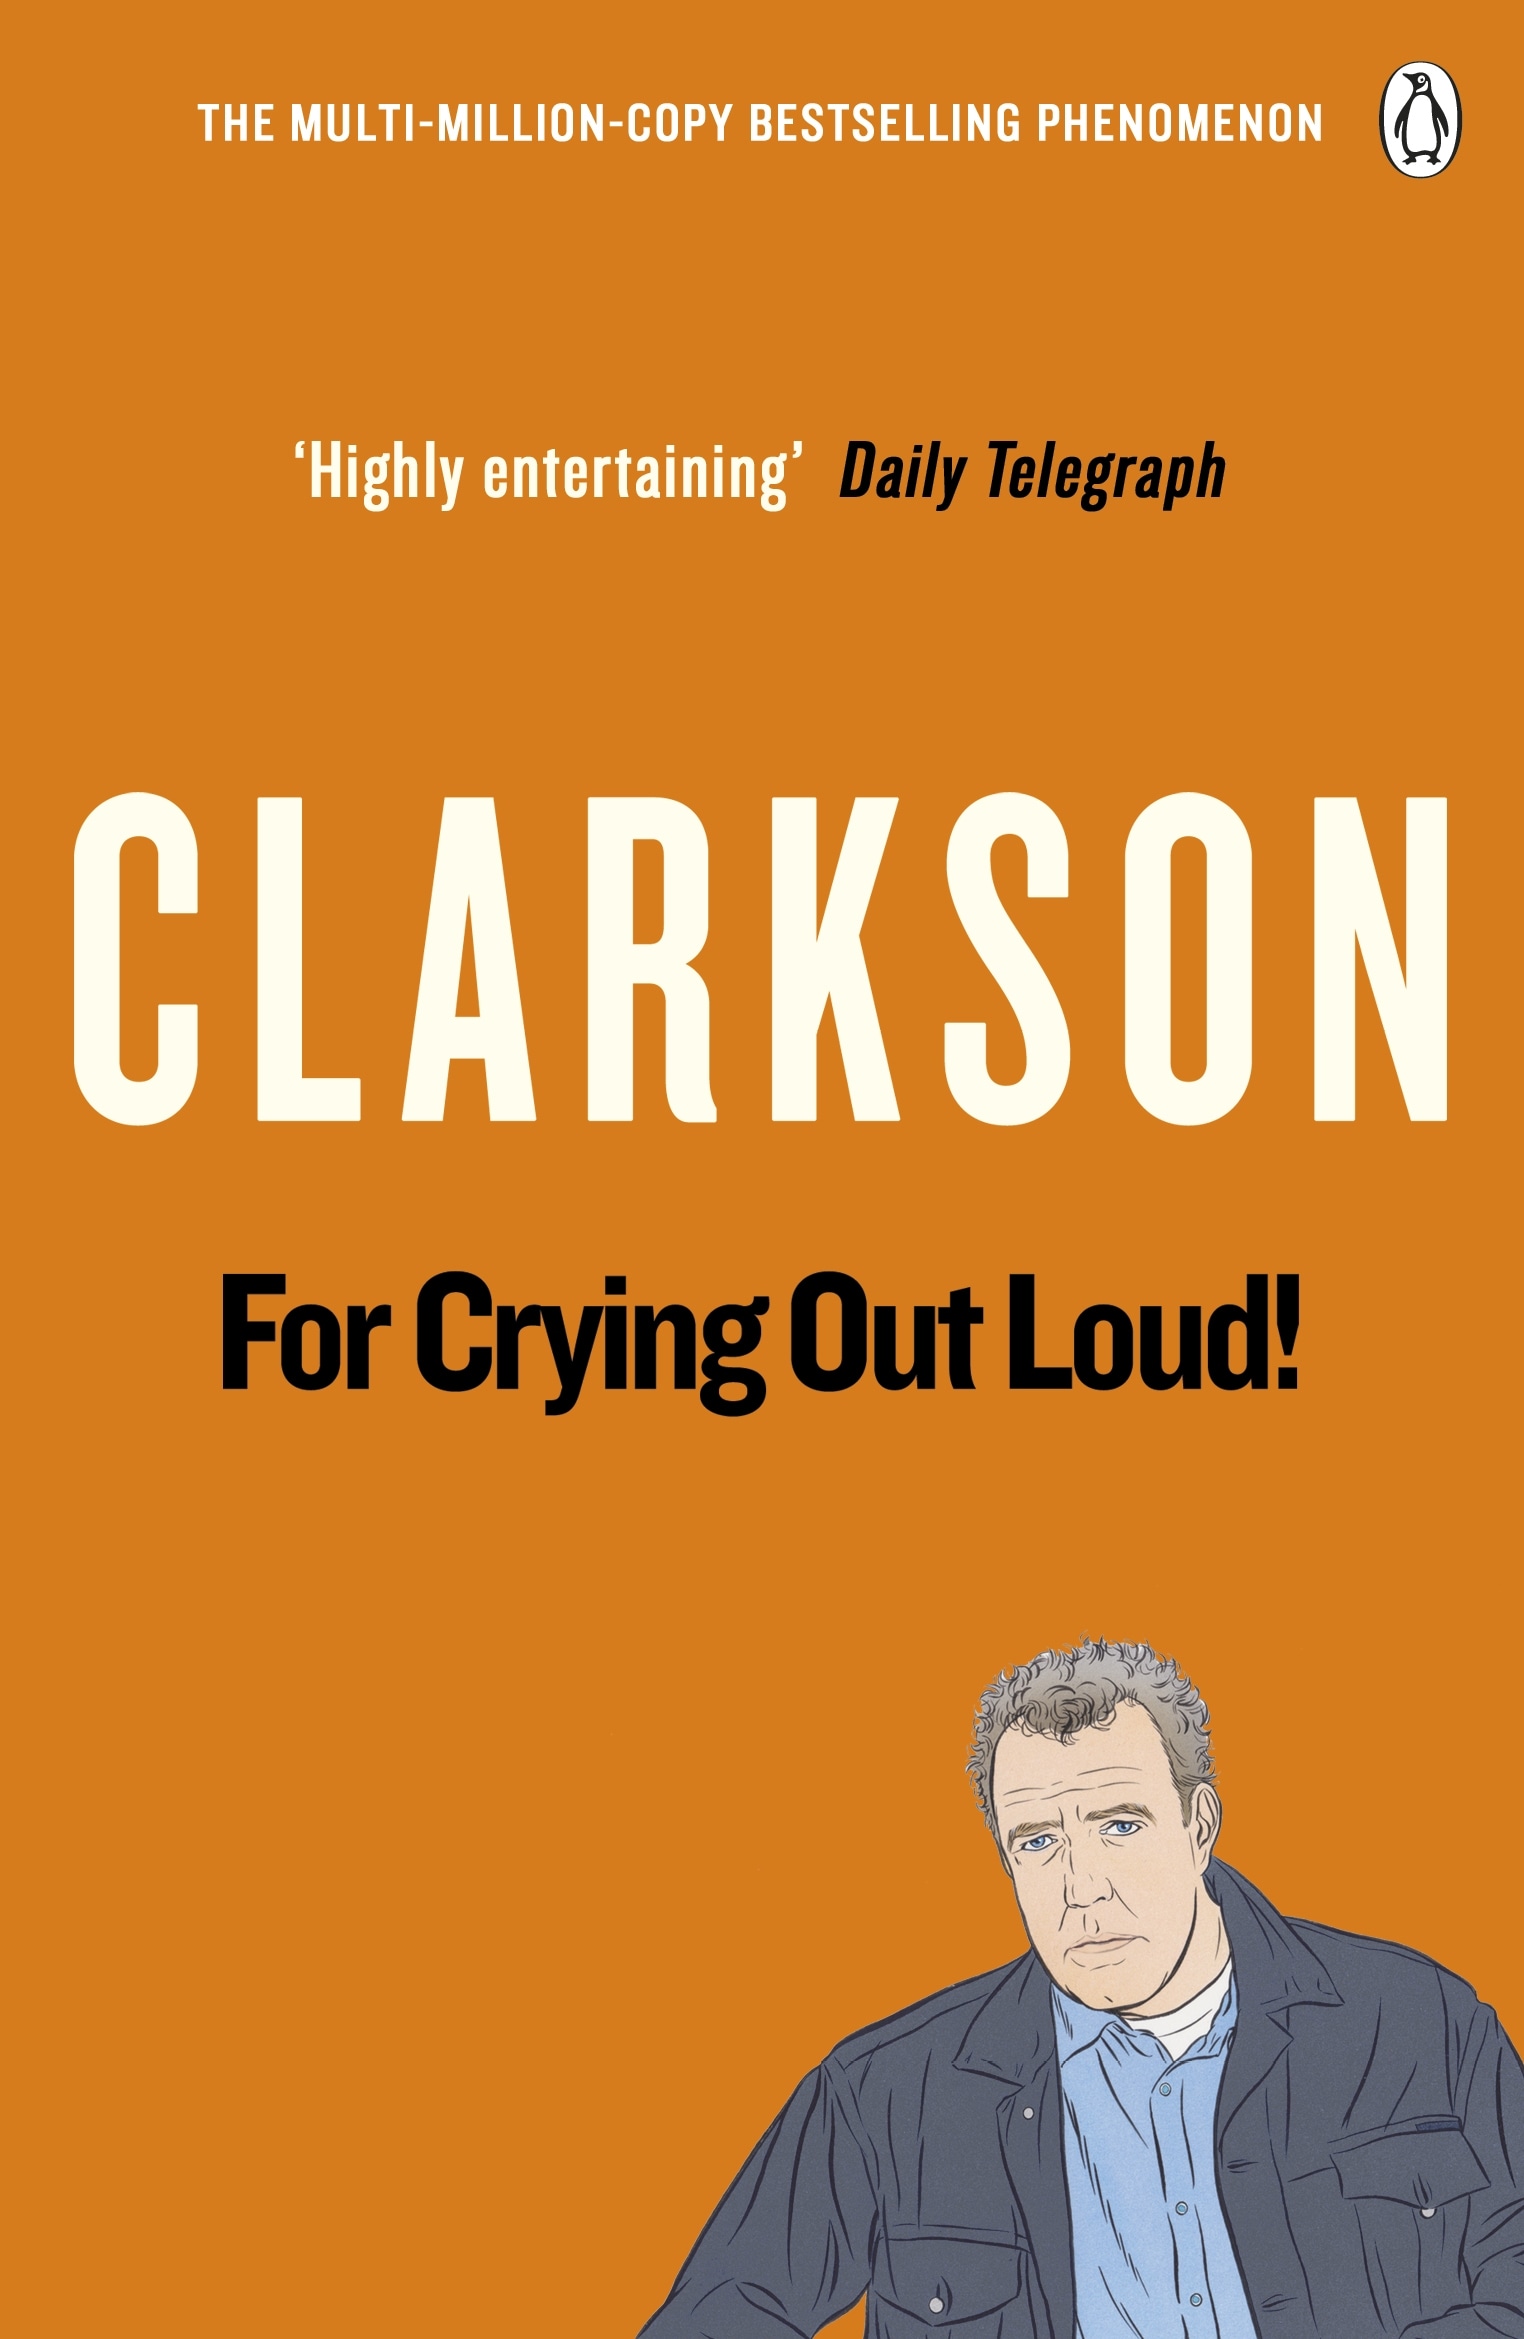 Book “For Crying Out Loud” by Jeremy Clarkson